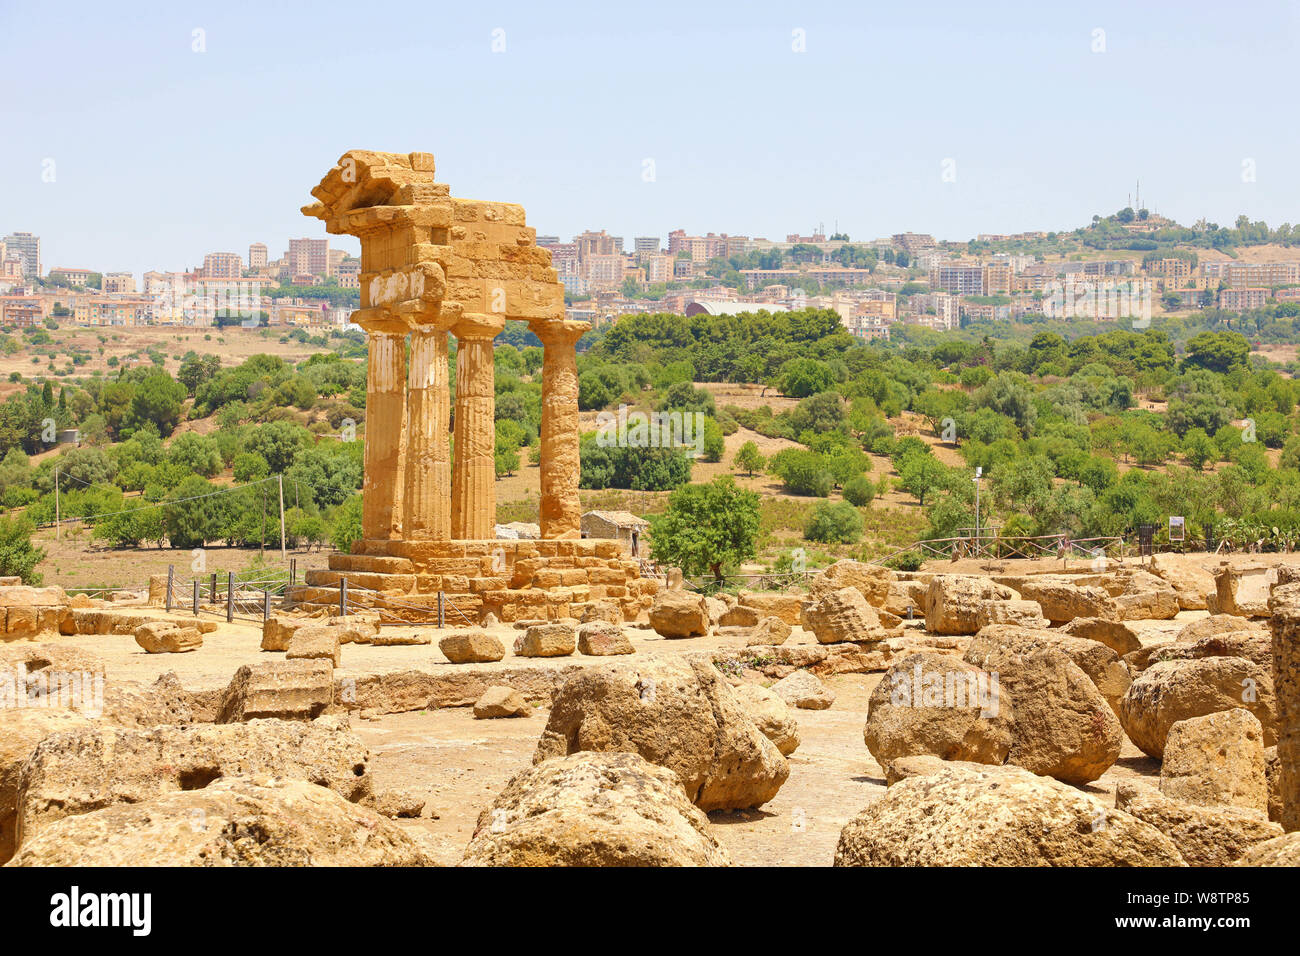 Temple of Dioscuri (Castor and Pollux). Famous ancient ruins in Valley of the Temples, Agrigento, Sicily, Italy. UNESCO World Heritage Site. Stock Photo